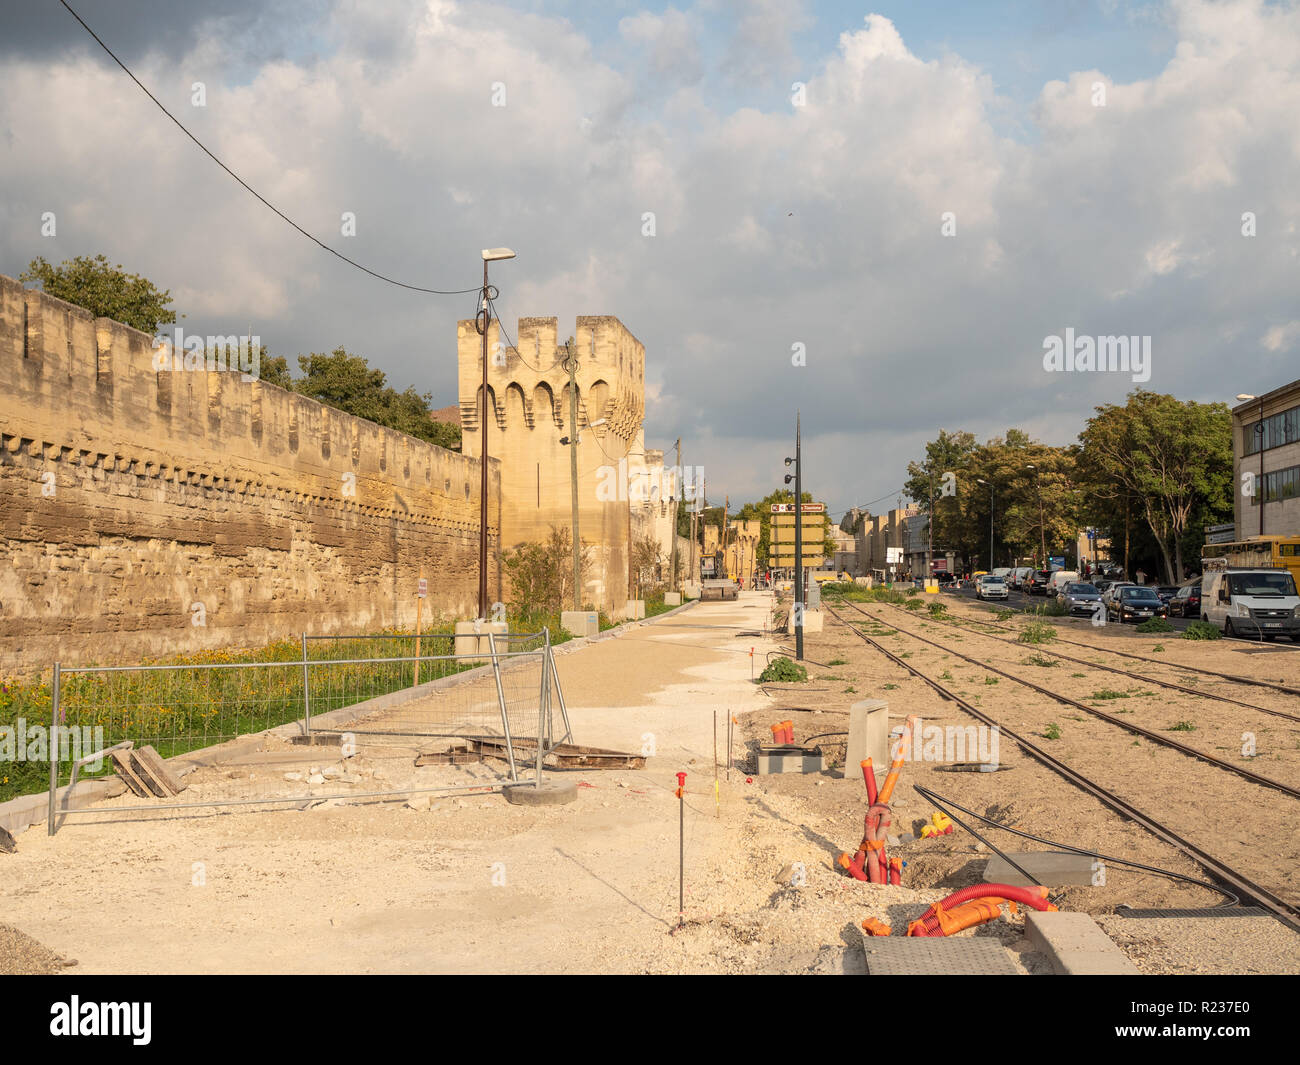 View on the walls of the wall of the city of Avignon. Construction of a tram in the city. France. Stock Photo